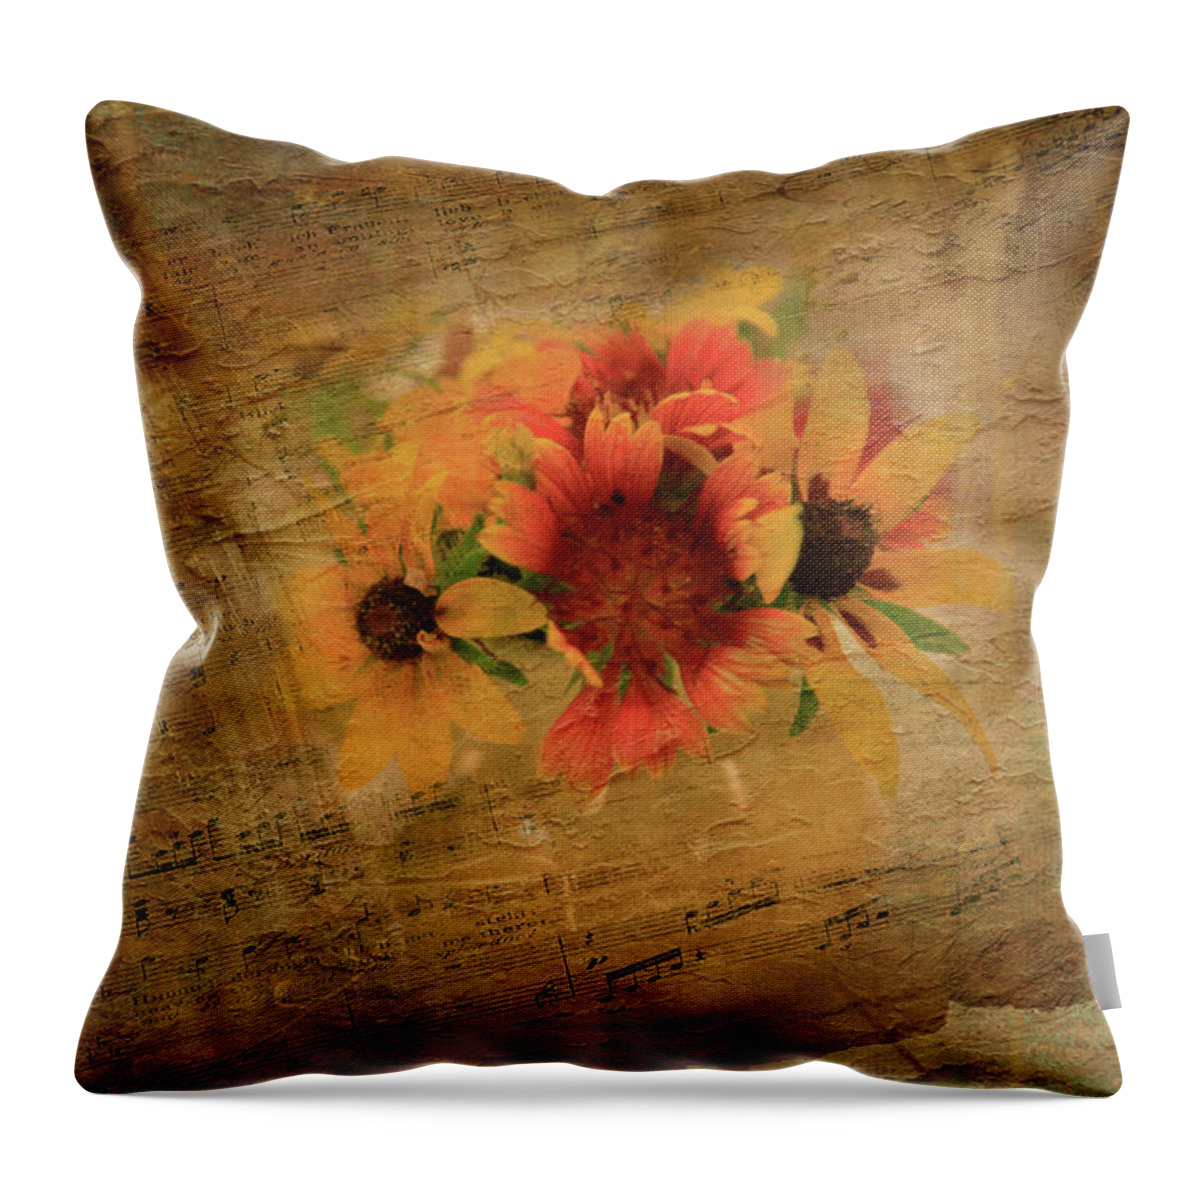 Sunflowers Throw Pillow featuring the photograph Summer Sun Flowers Song by Toni Hopper